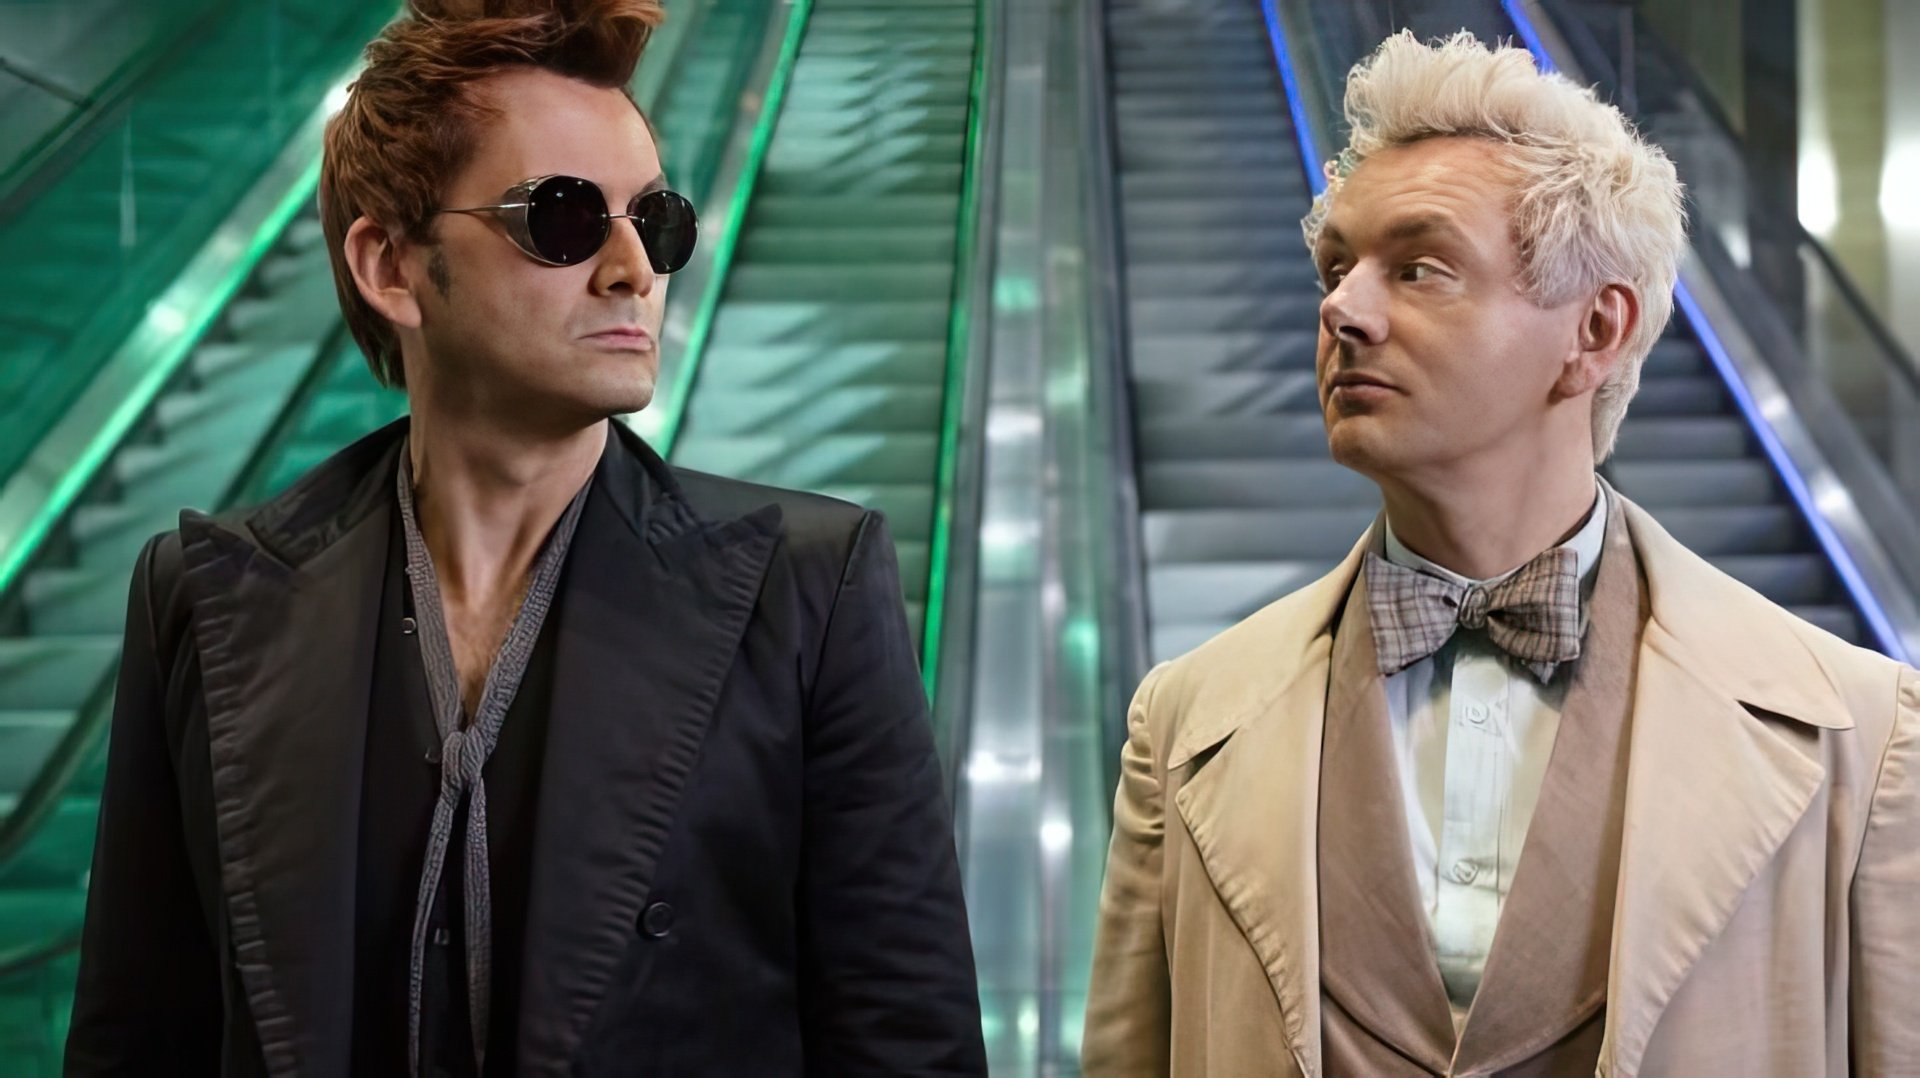 David Tennant and Michael Sheen in the series 'Good Omens'